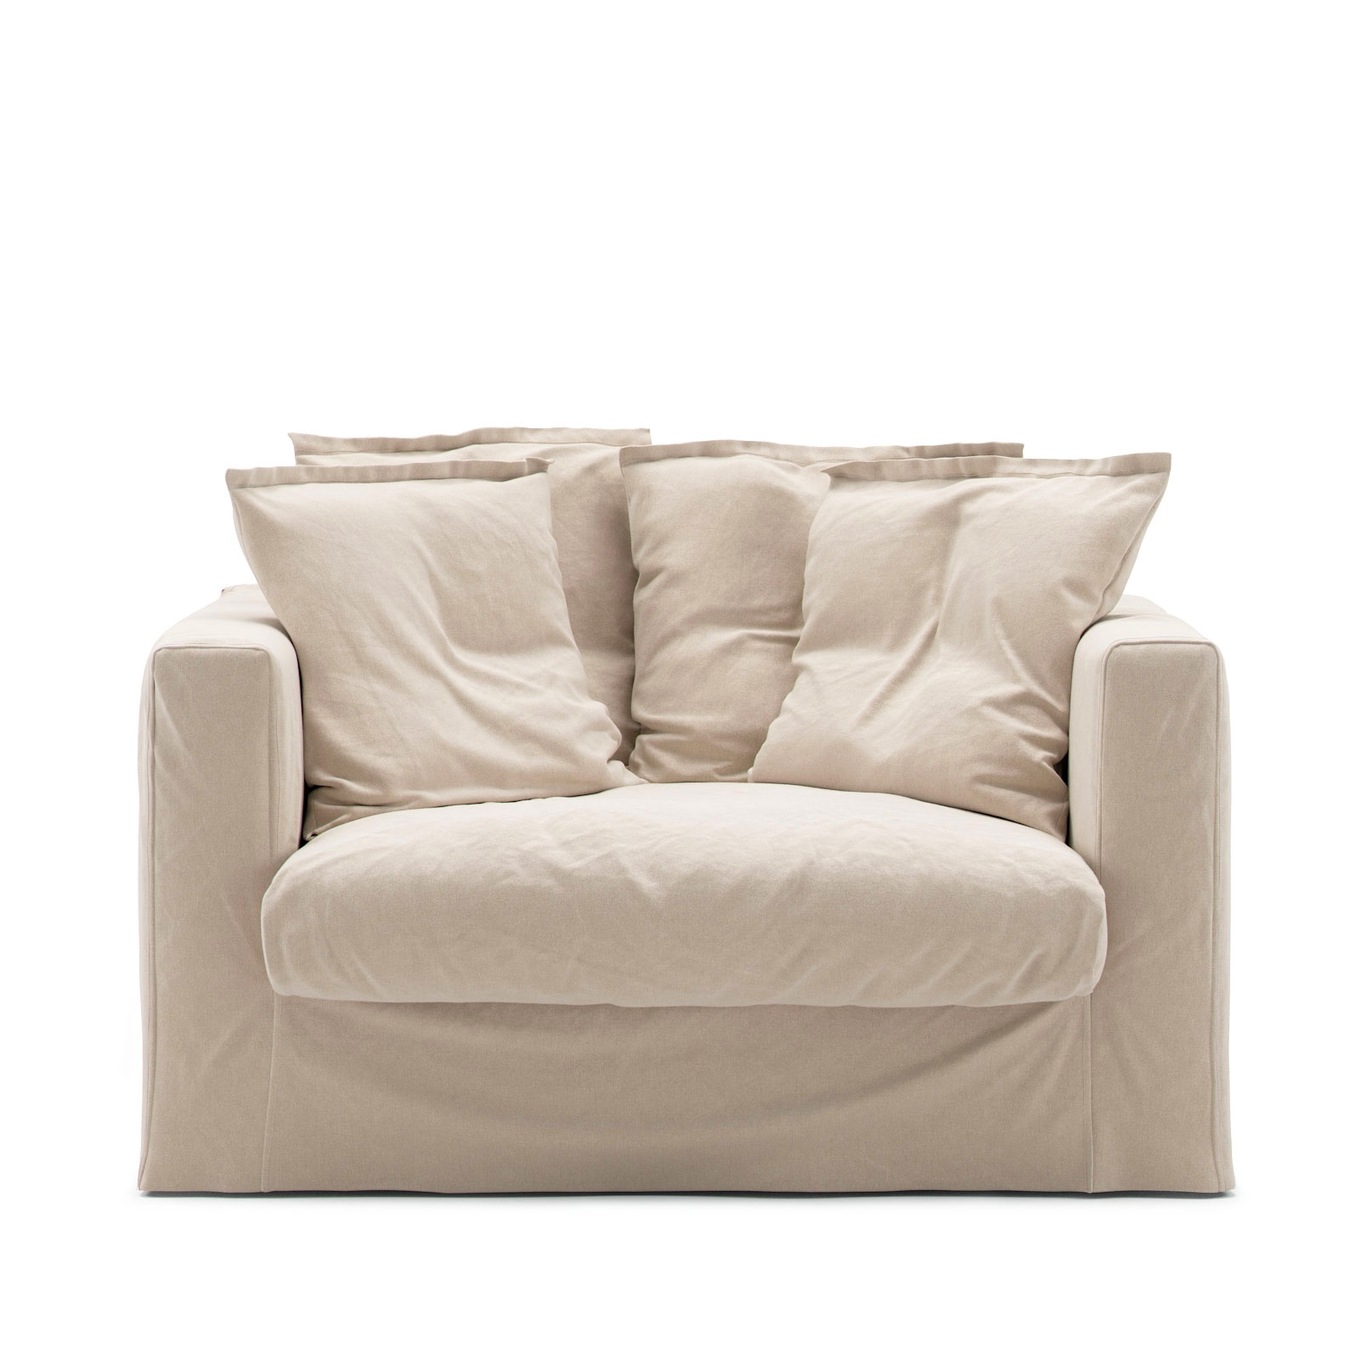 Le Grand Air Loveseat Upholstery Cotton, Beige